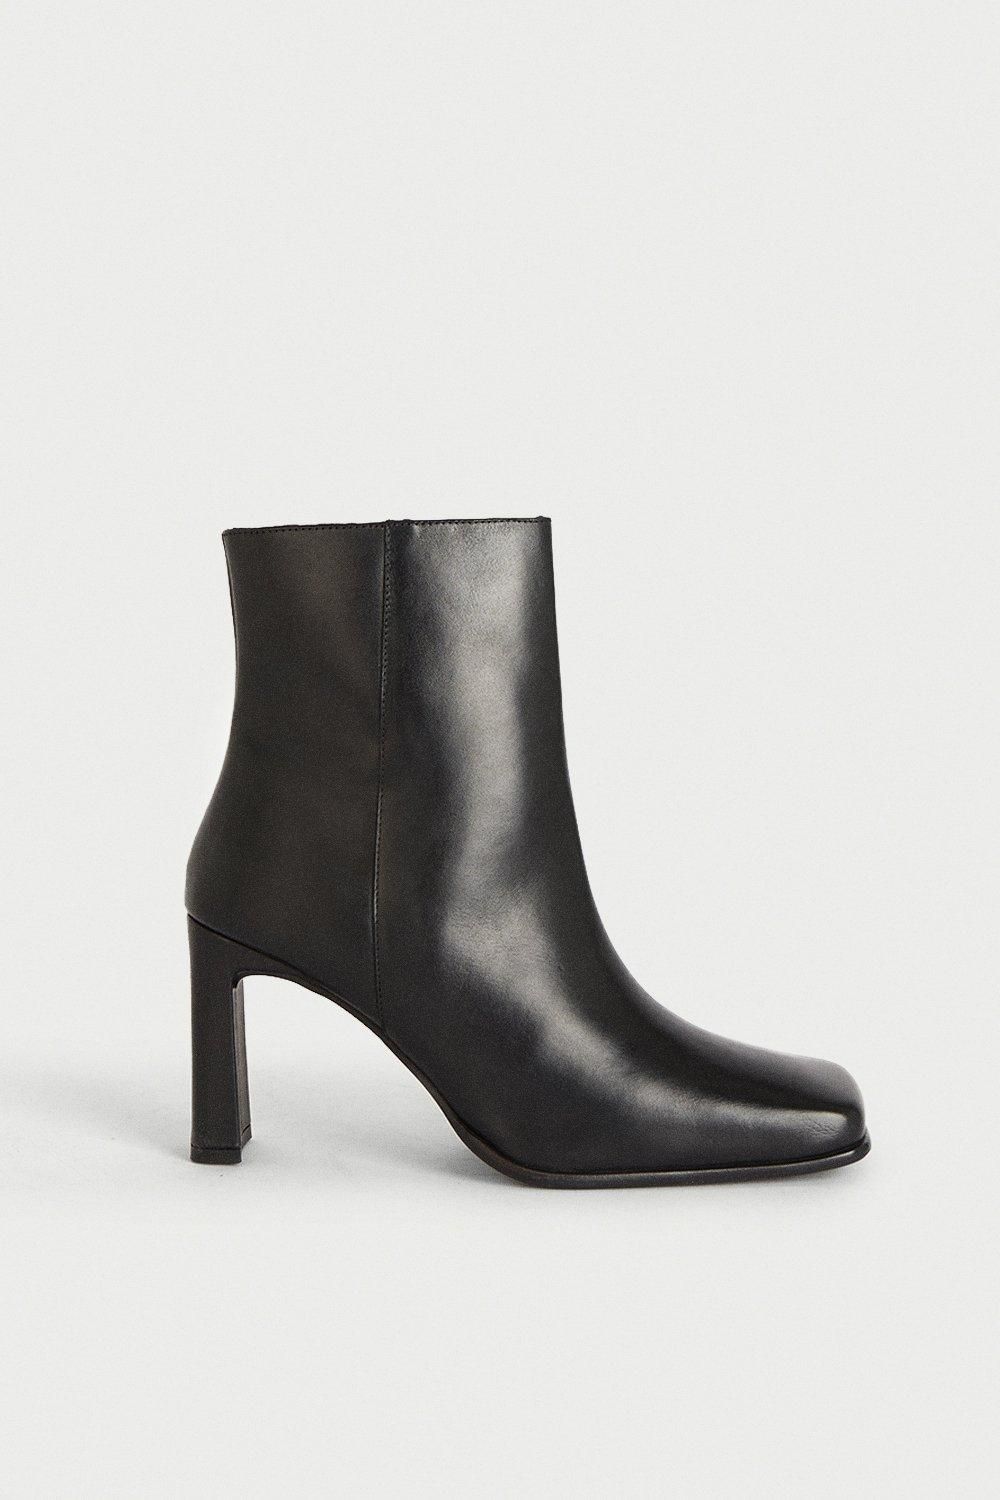 Premium Leather Squared Toe Knee Ankle Boots | Warehouse UK & IE